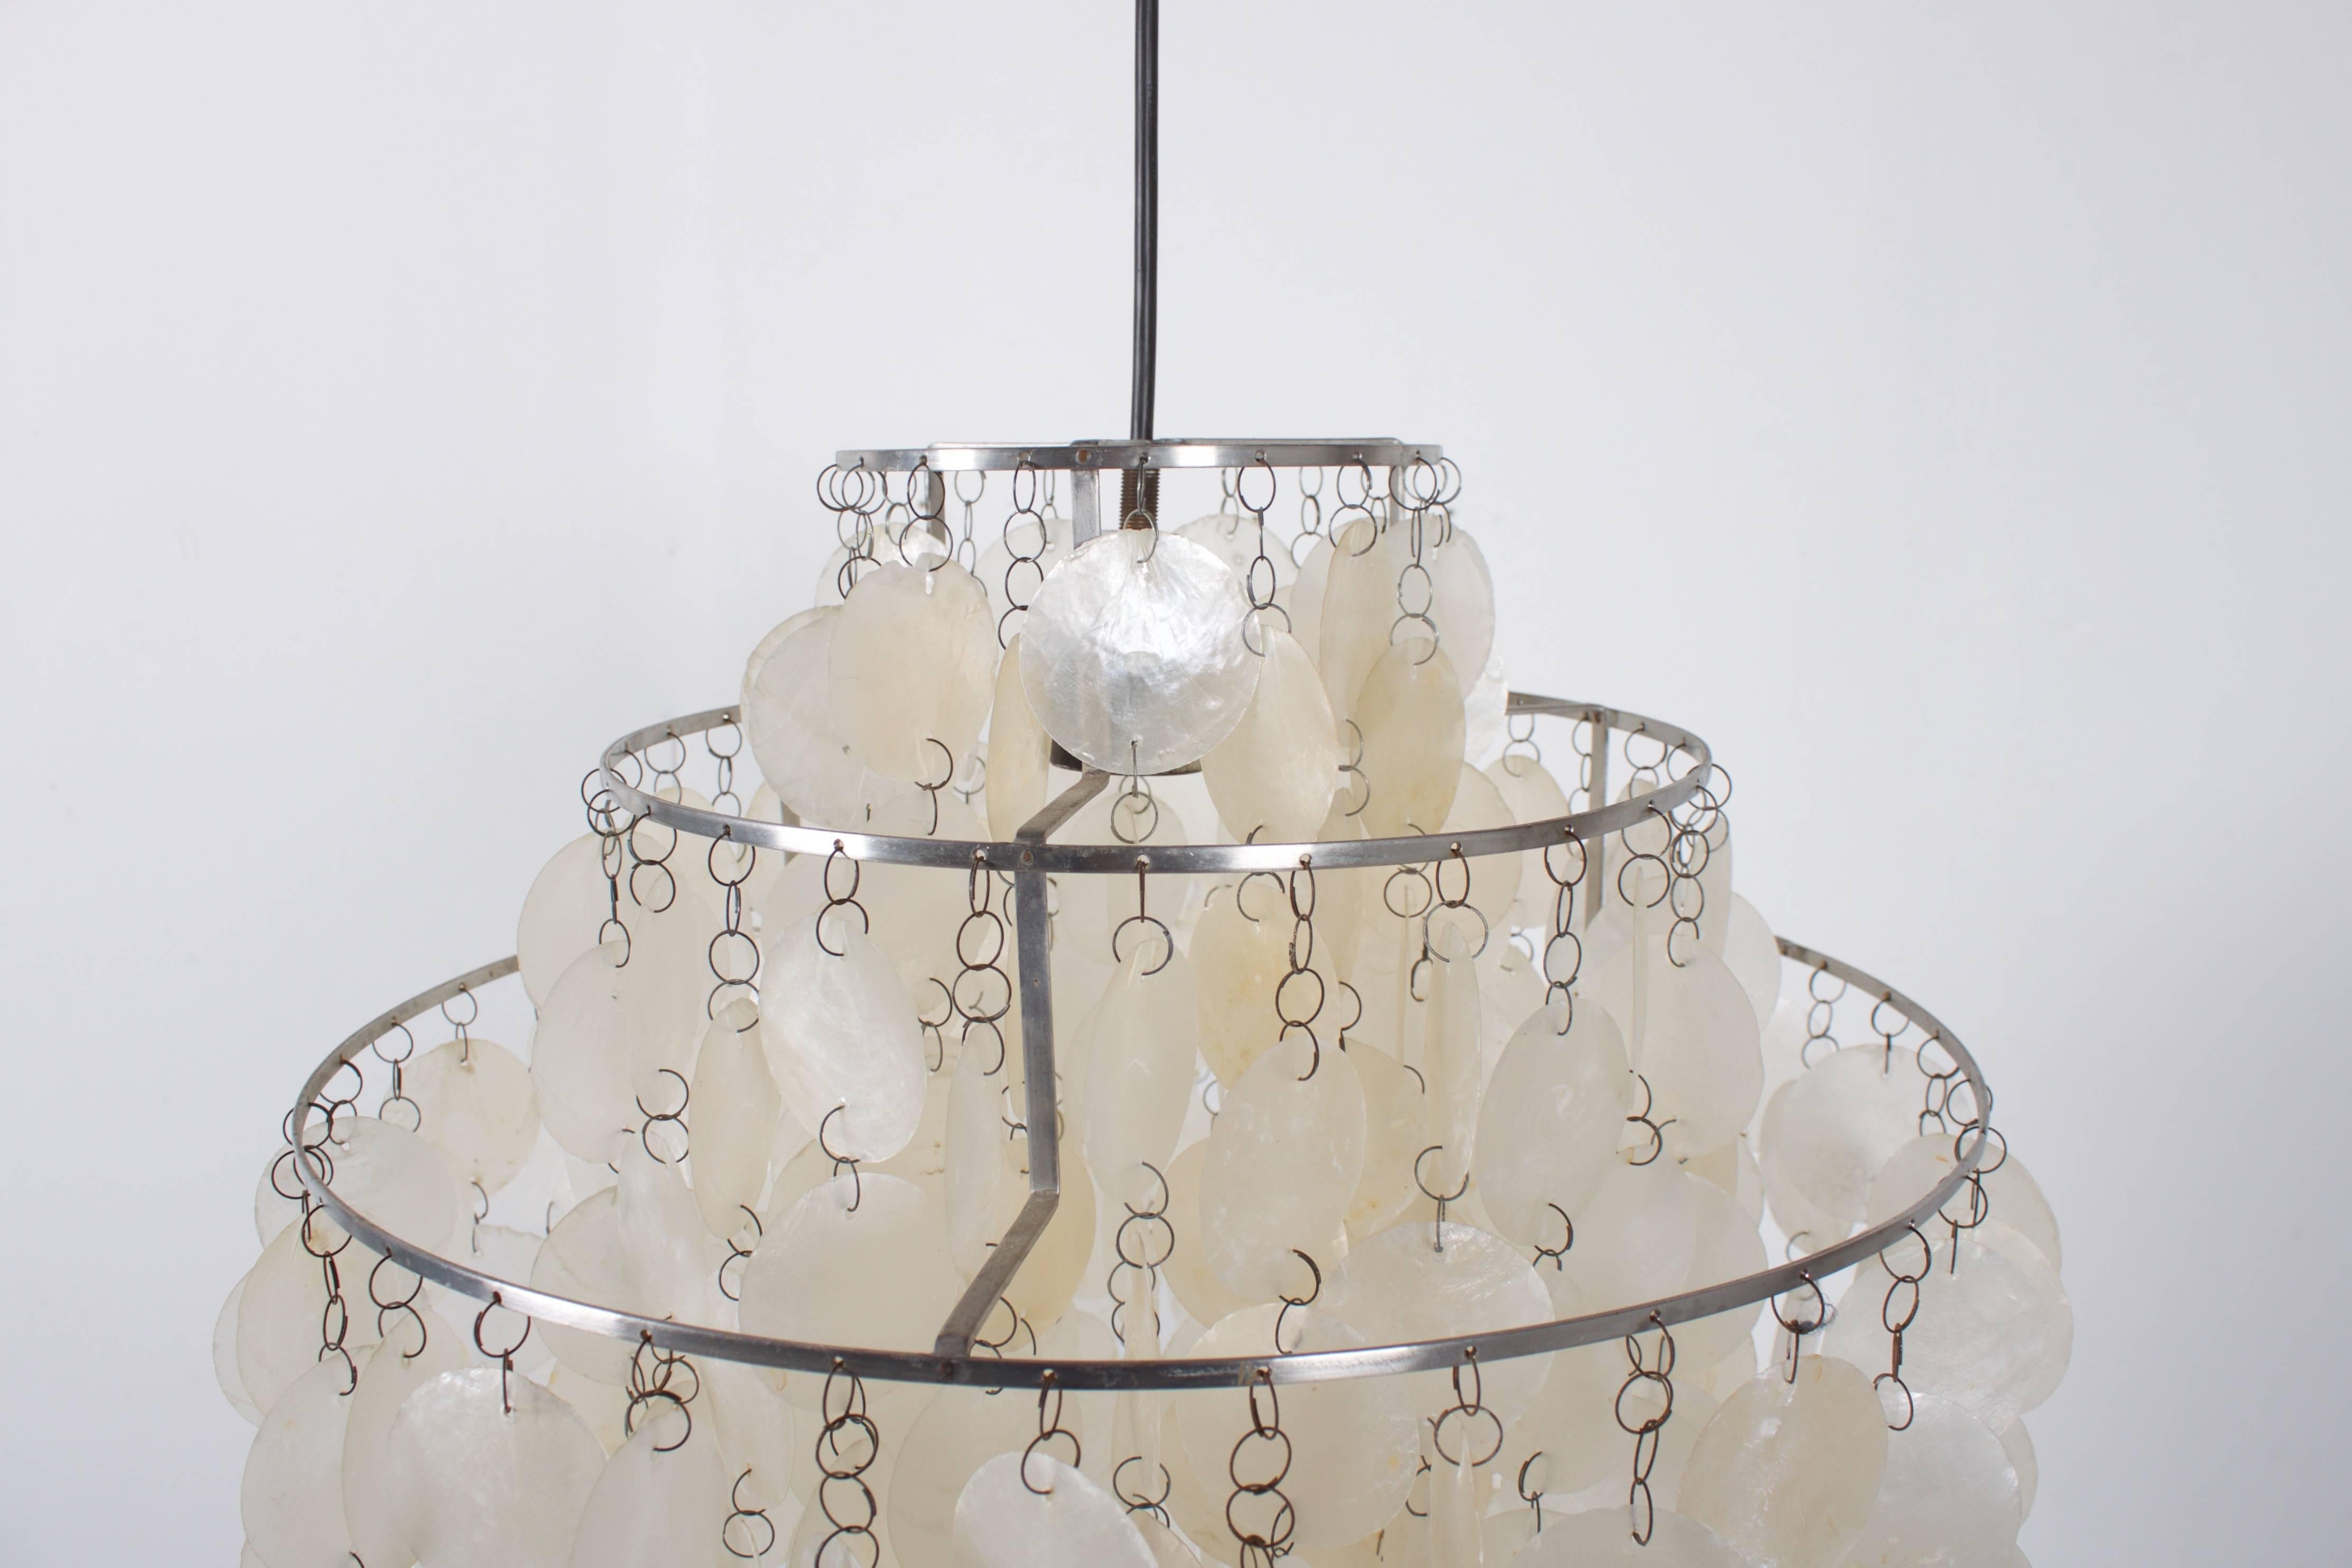 Verner Panton Fun 1DM chandelier in original condition.

Manufactured by J. Lüber in basel.

The metal frame holds the shell plates that create a beautiful light effect. 

Rewired

Drop can be modified on request.

If you have any